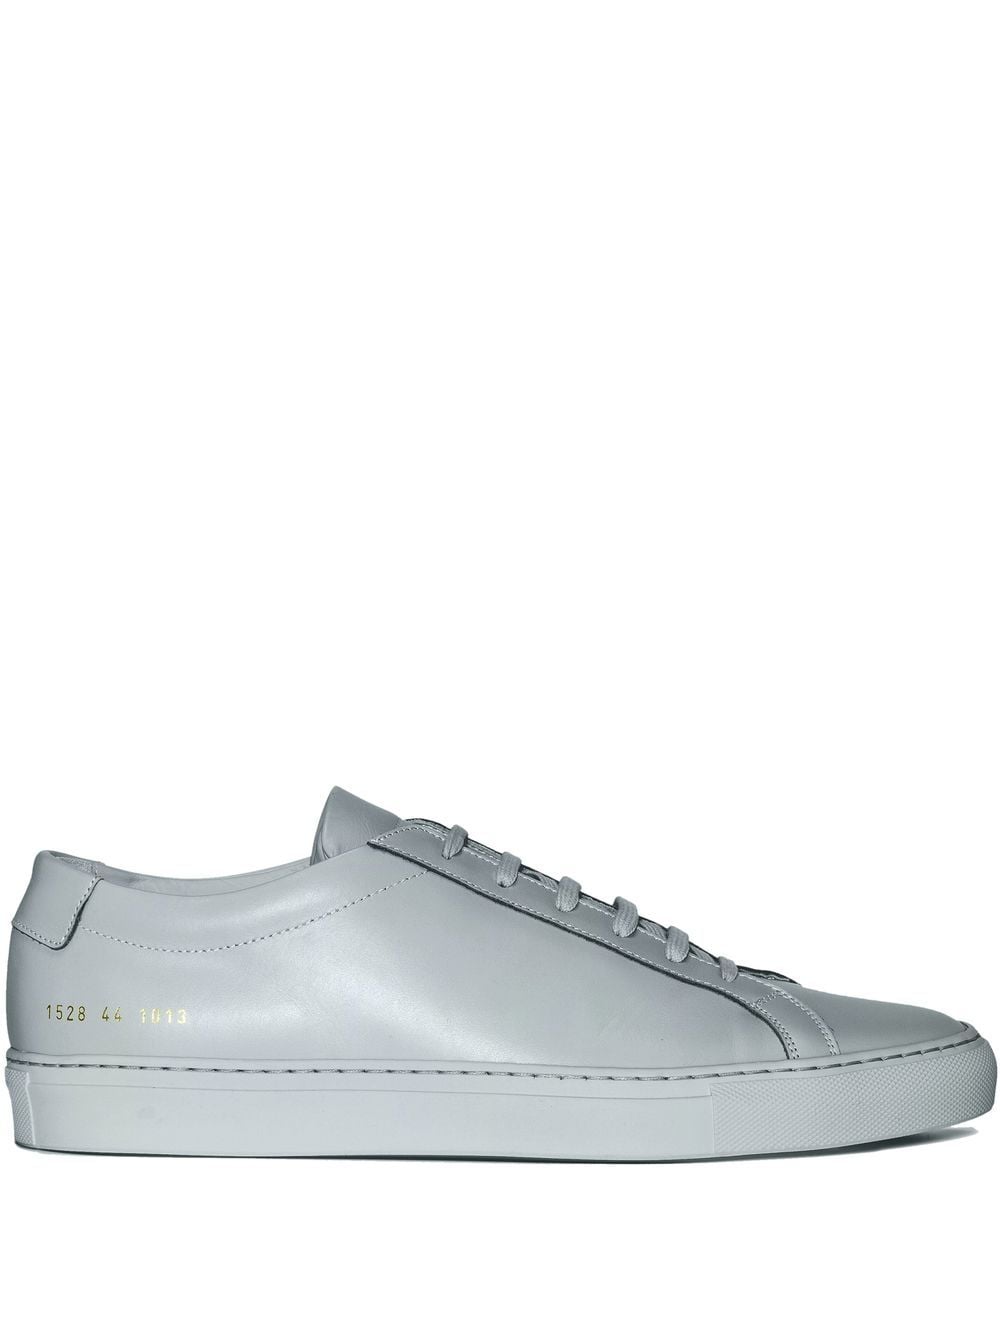 Common Projects Achilles low-top sneakers - Grey von Common Projects